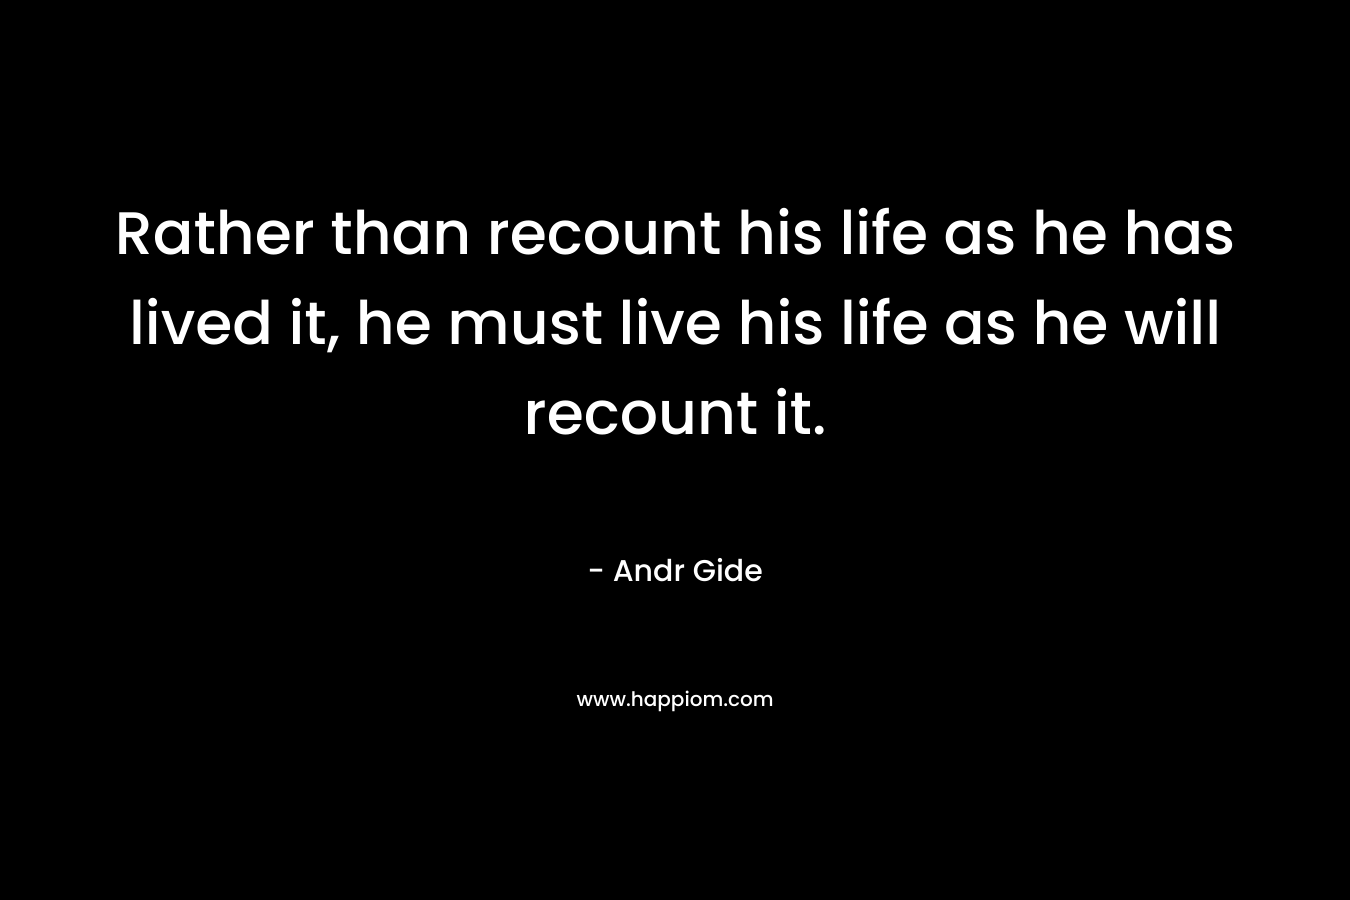 Rather than recount his life as he has lived it, he must live his life as he will recount it.